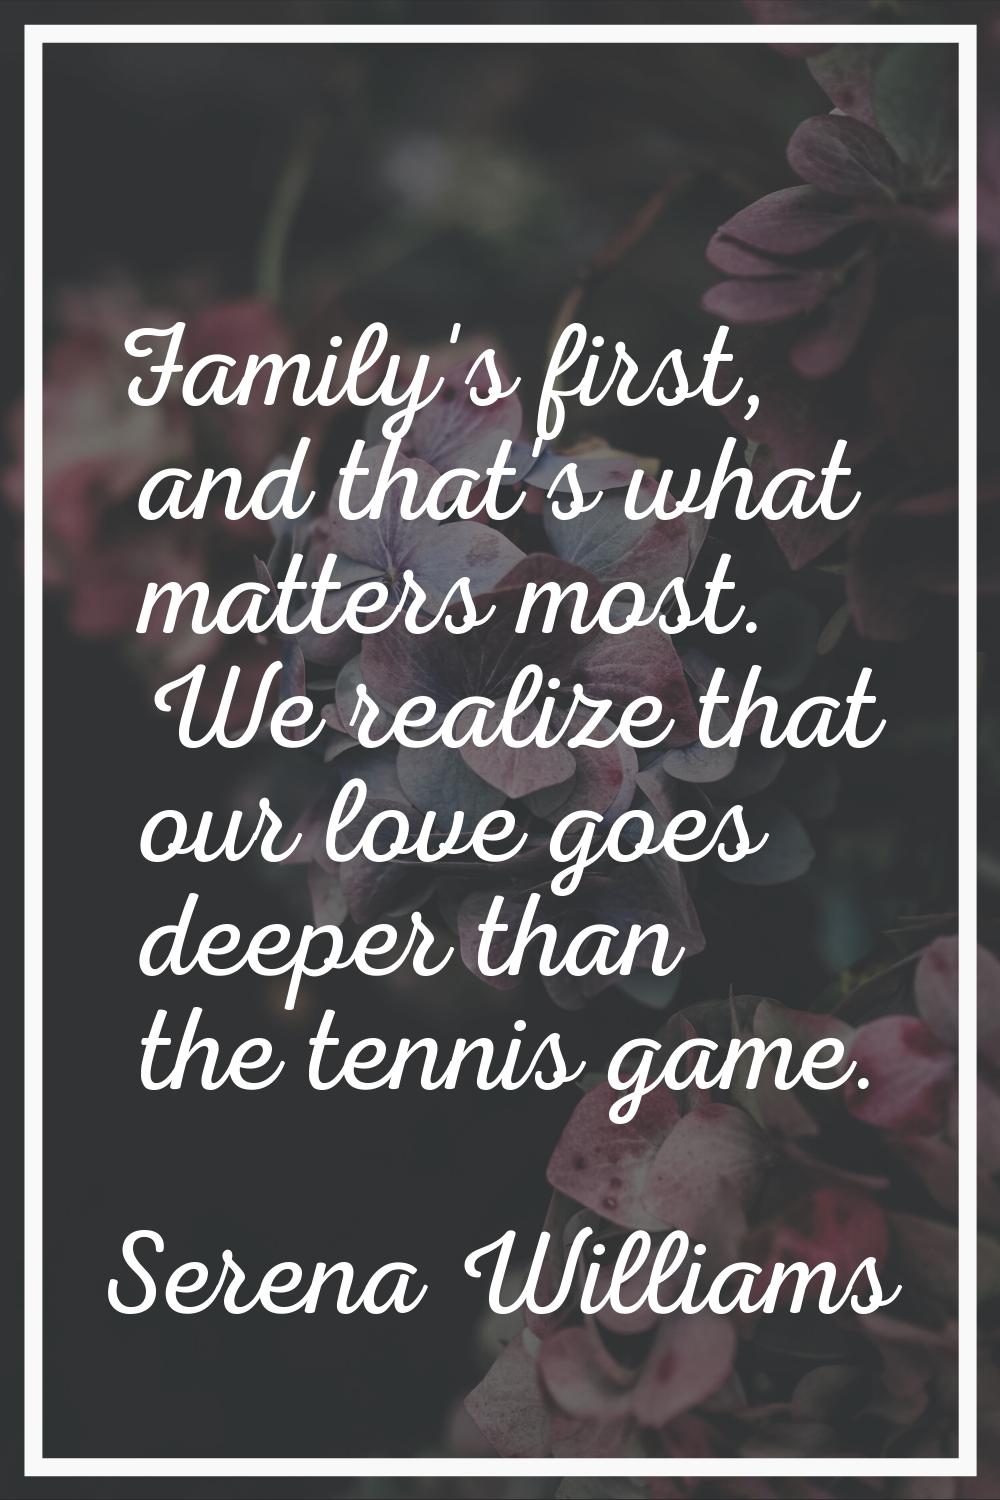 Family's first, and that's what matters most. We realize that our love goes deeper than the tennis 